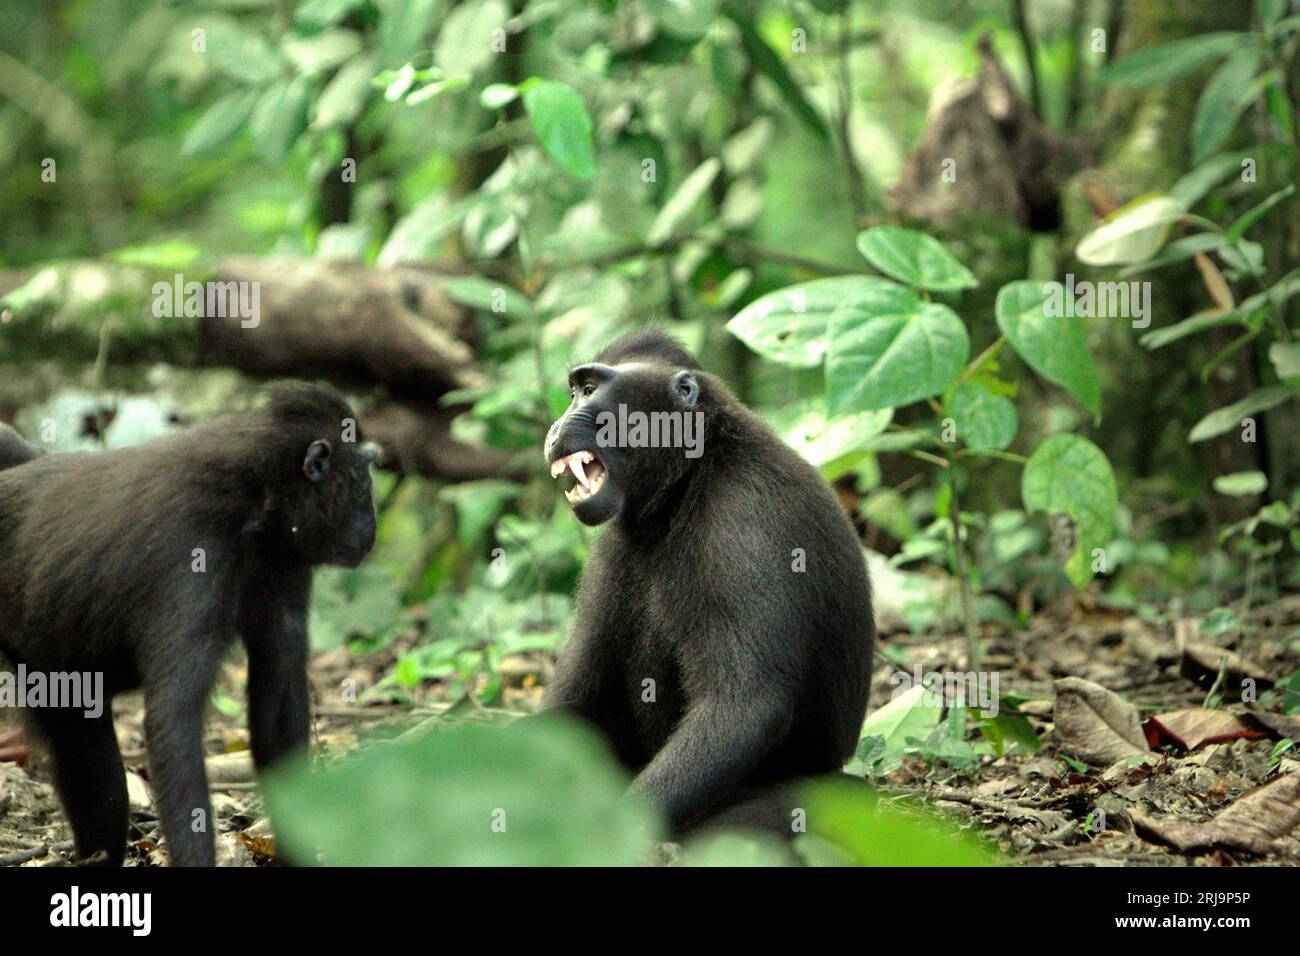 A crested macaque (Macaca nigra) shows a bared-teeth display toward another individual as they are having social activity on the ground in Tangkoko forest, North Sulawesi, Indonesia. Facial expressions (half-open mouth, open mouth bared-teeth, stare, jaw movement) in crested macaques are defined as threat, according to primate scientists. However, a “neutral” face (face without movement) in primates is still communicating something. In this threatened species, 'the neutral face was more closely associated with a conflict outcome than screams and threat faces, suggesting that the absence of... Stock Photo